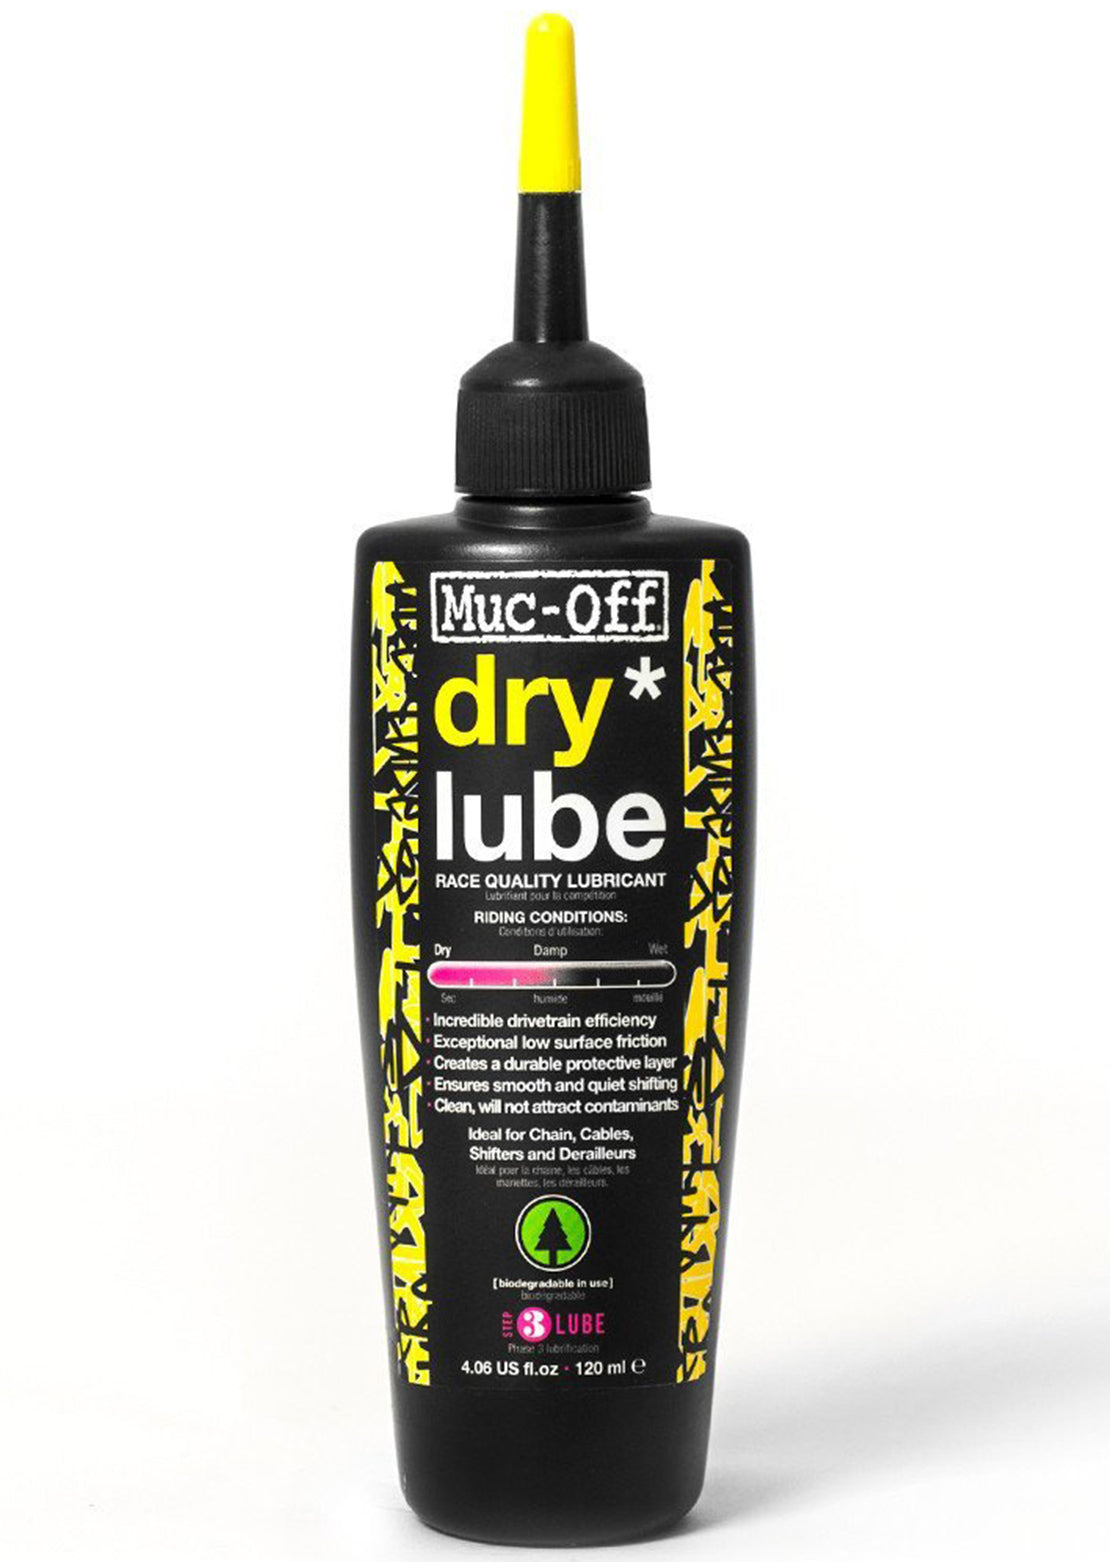 Muc-Off Wash, Protect &amp; Lube Maintenance Kit - Dry Lube